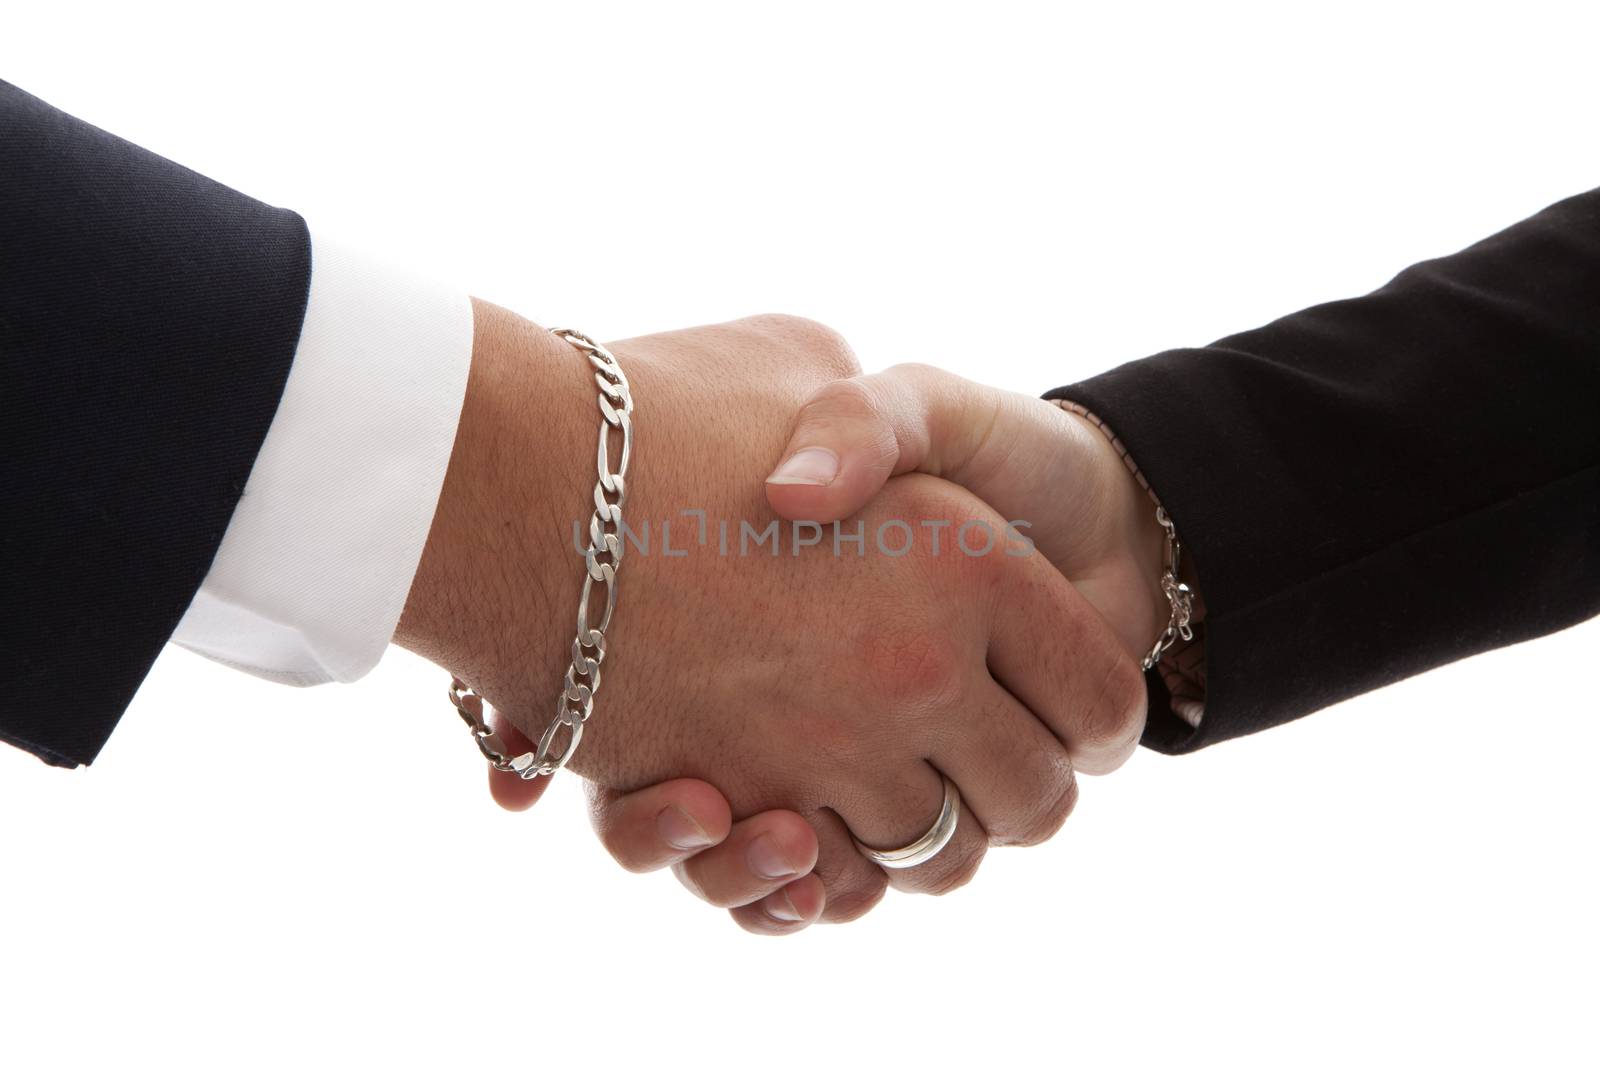 Two persons shaking hands in closeup over white background